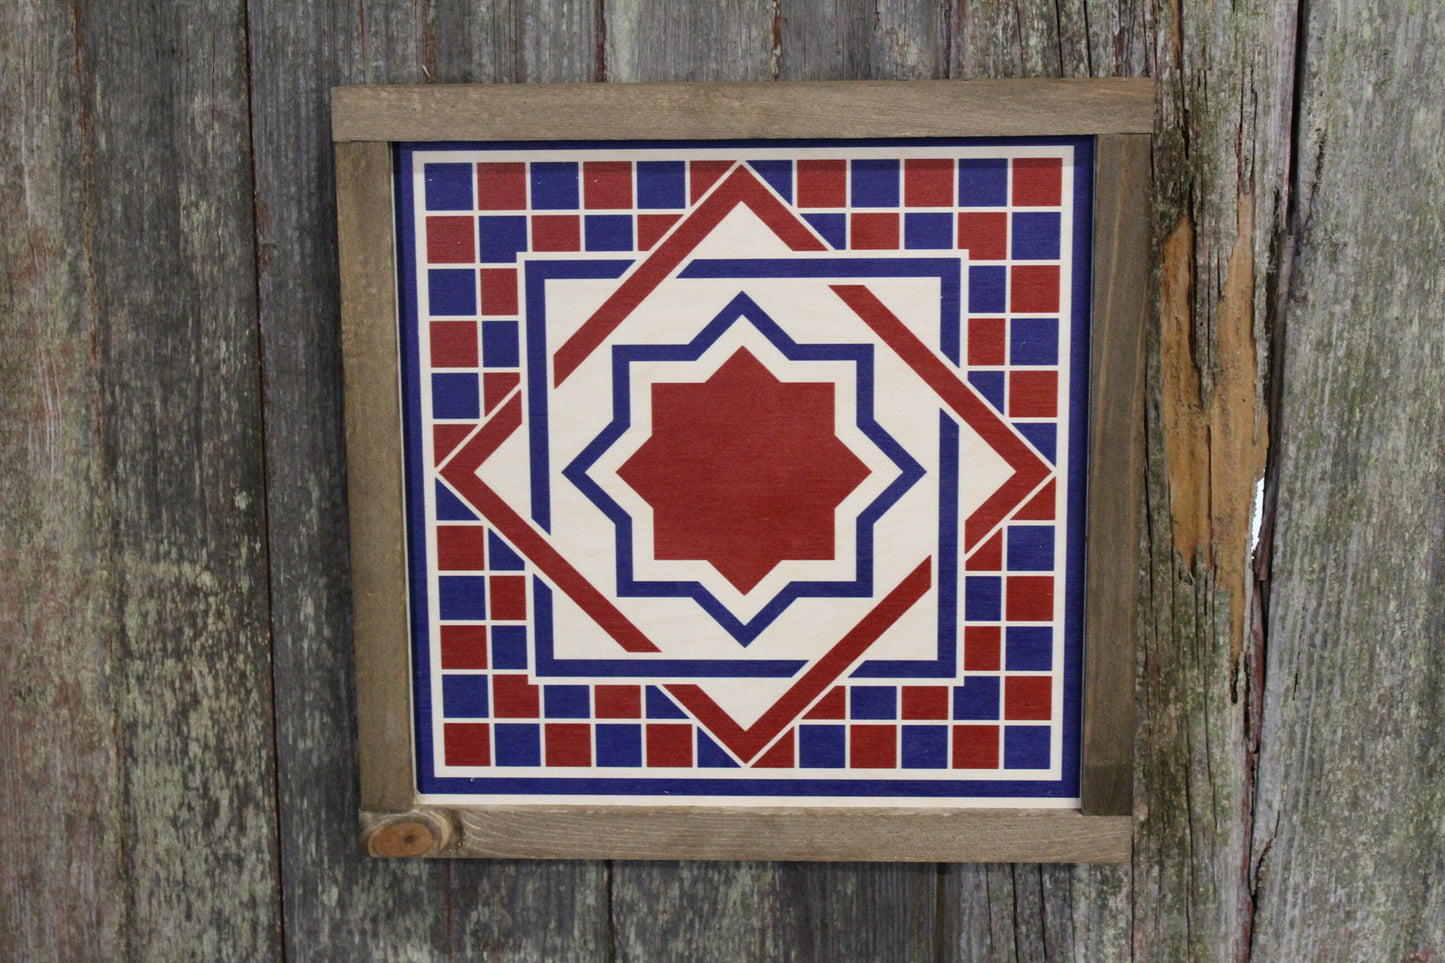 Diamond Triangle Barn Quilt Wood Sign Stylized Geometric Origami Red White Blue Square Pattern Block Wall Art Farmhouse Primitive Rustic